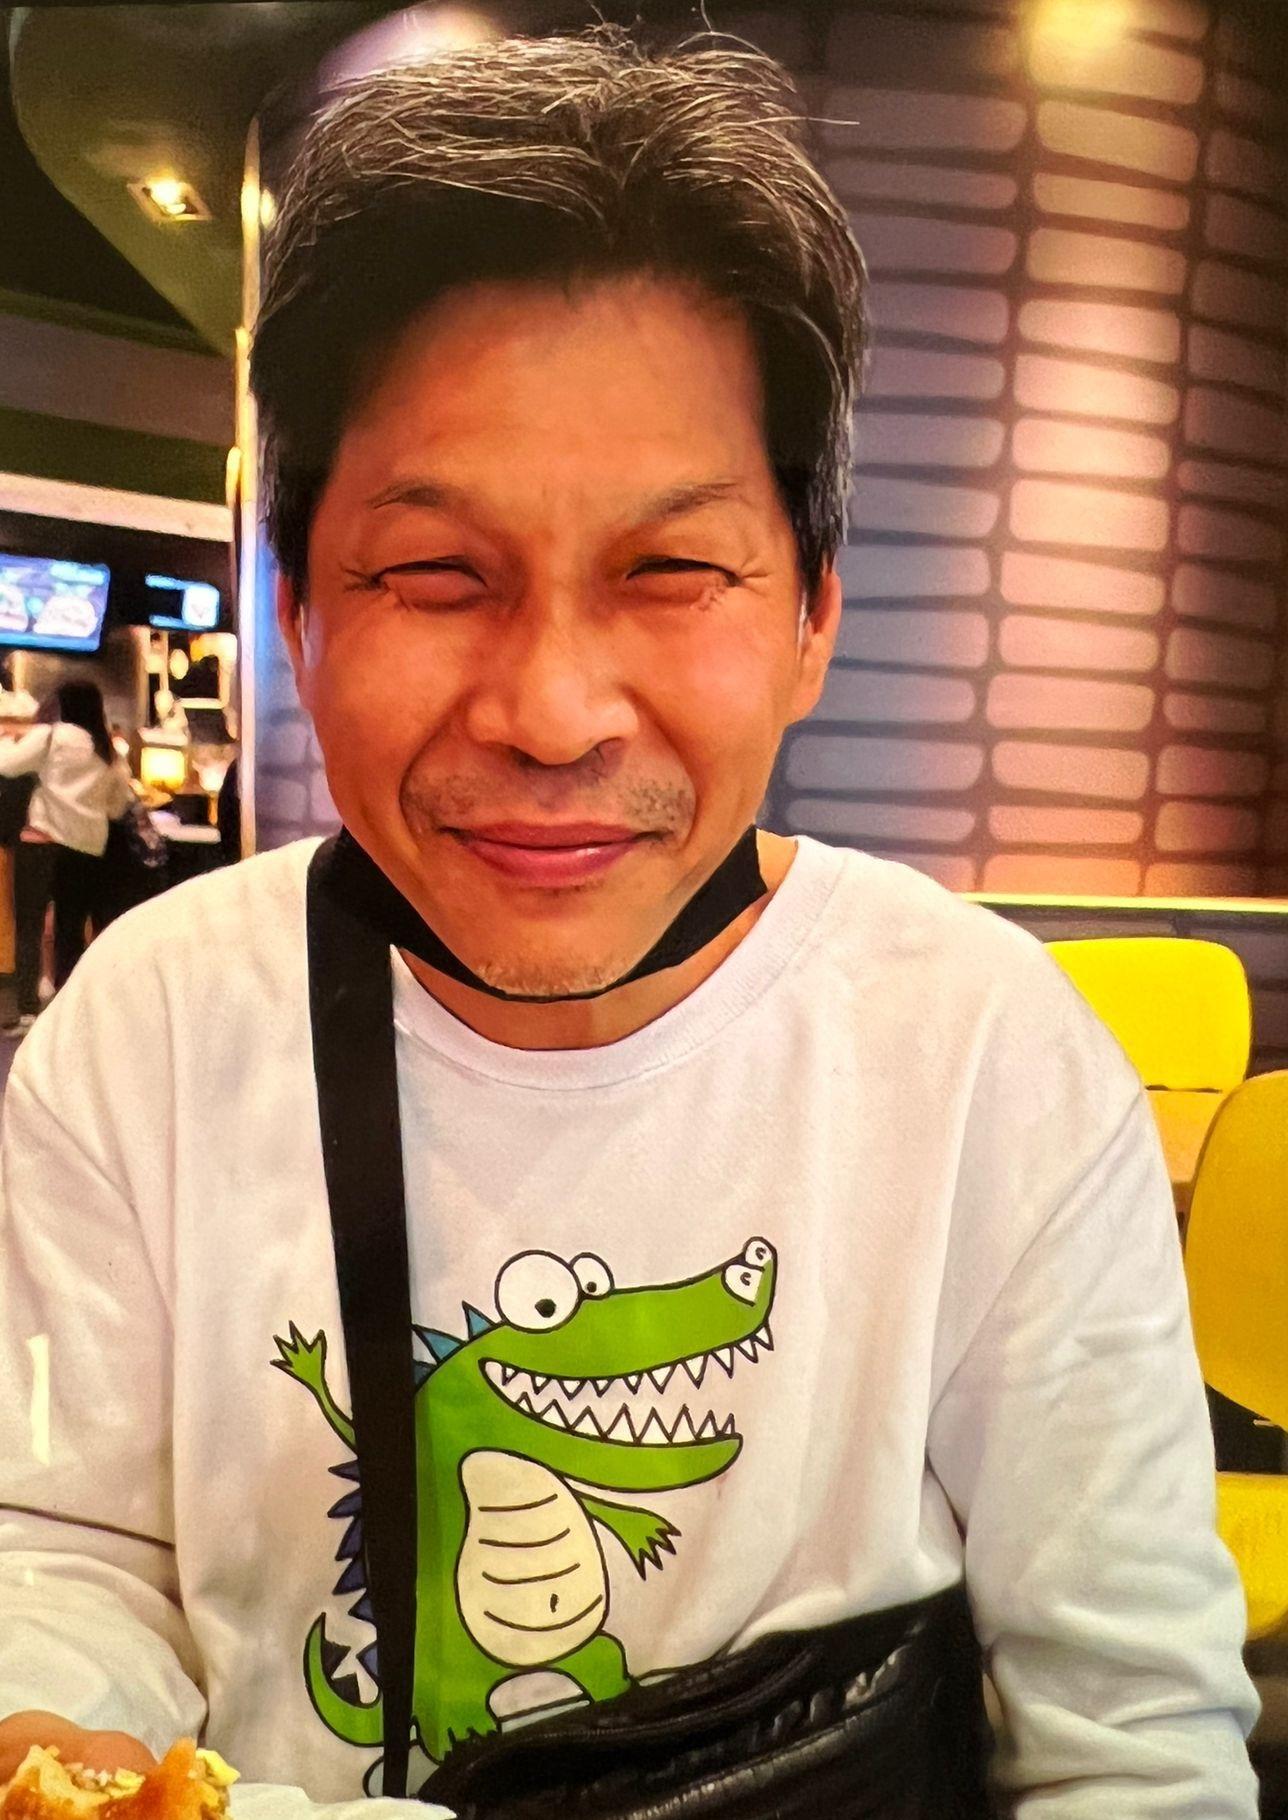 Wong Chi-shun, aged 57, is about 1.65 metres tall, 62 kilograms in weight and of medium build. He has a long face with yellow complexion and short greyish black hair. He was last seen wearing a dark-coloured shirt, black shorts and sneakers. 